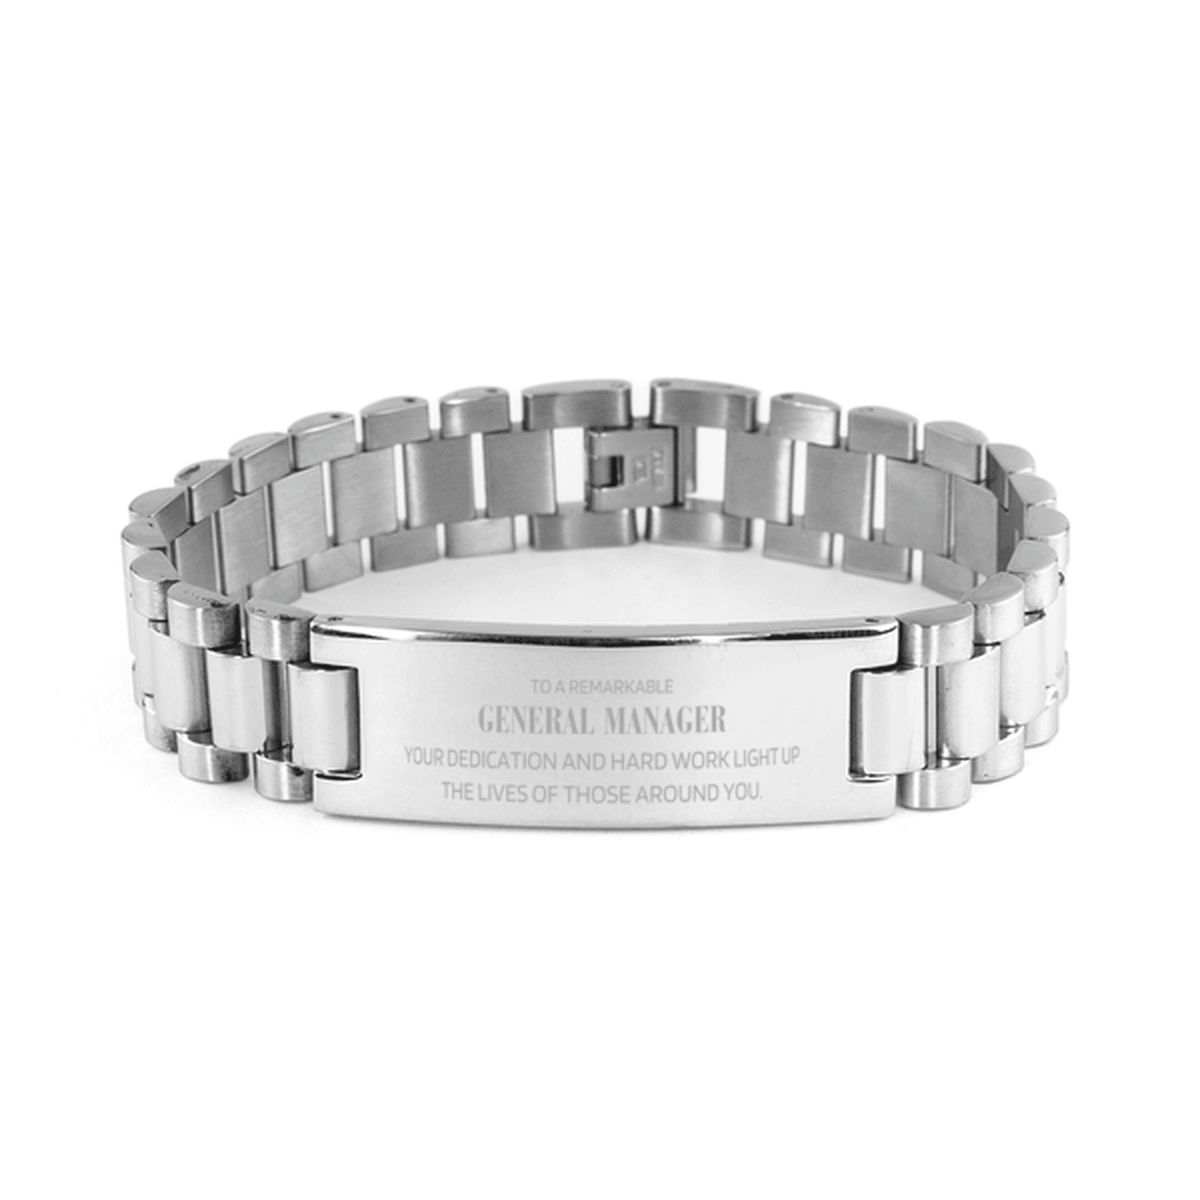 Remarkable General Manager Gifts, Your dedication and hard work, Inspirational Birthday Christmas Unique Ladder Stainless Steel Bracelet For General Manager, Coworkers, Men, Women, Friends - Mallard Moon Gift Shop